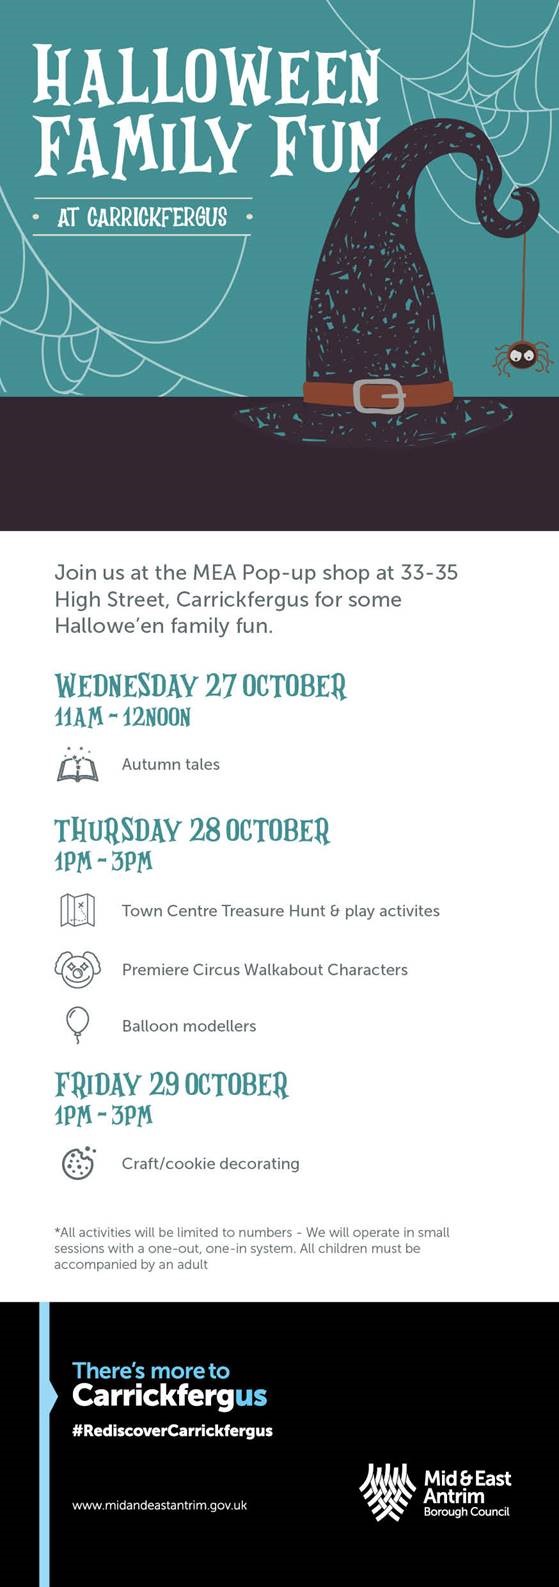 A leaflet with halloween events for the family